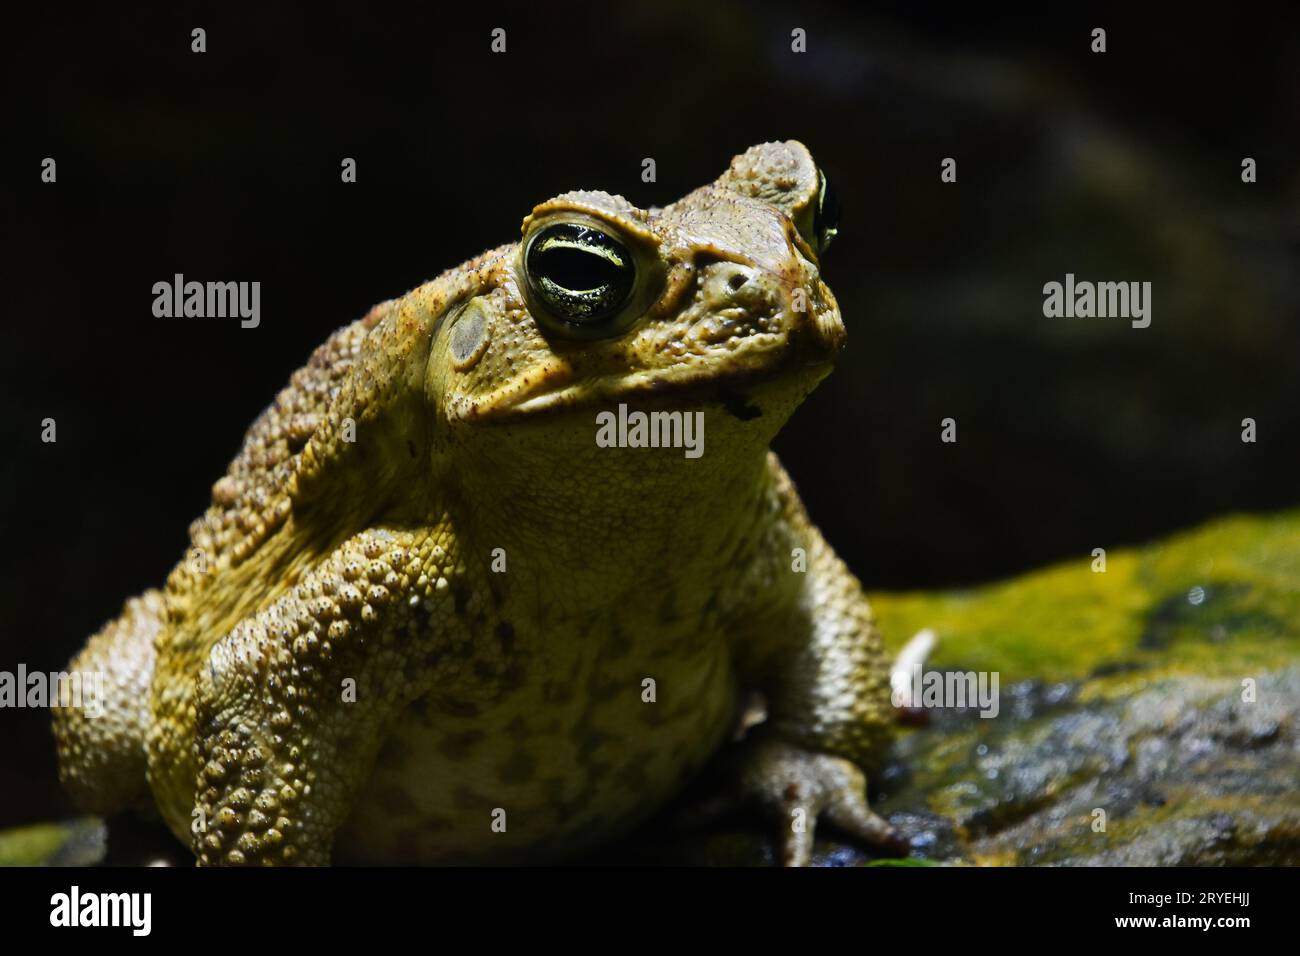 Giant neotropical cane toad portrait Stock Photo